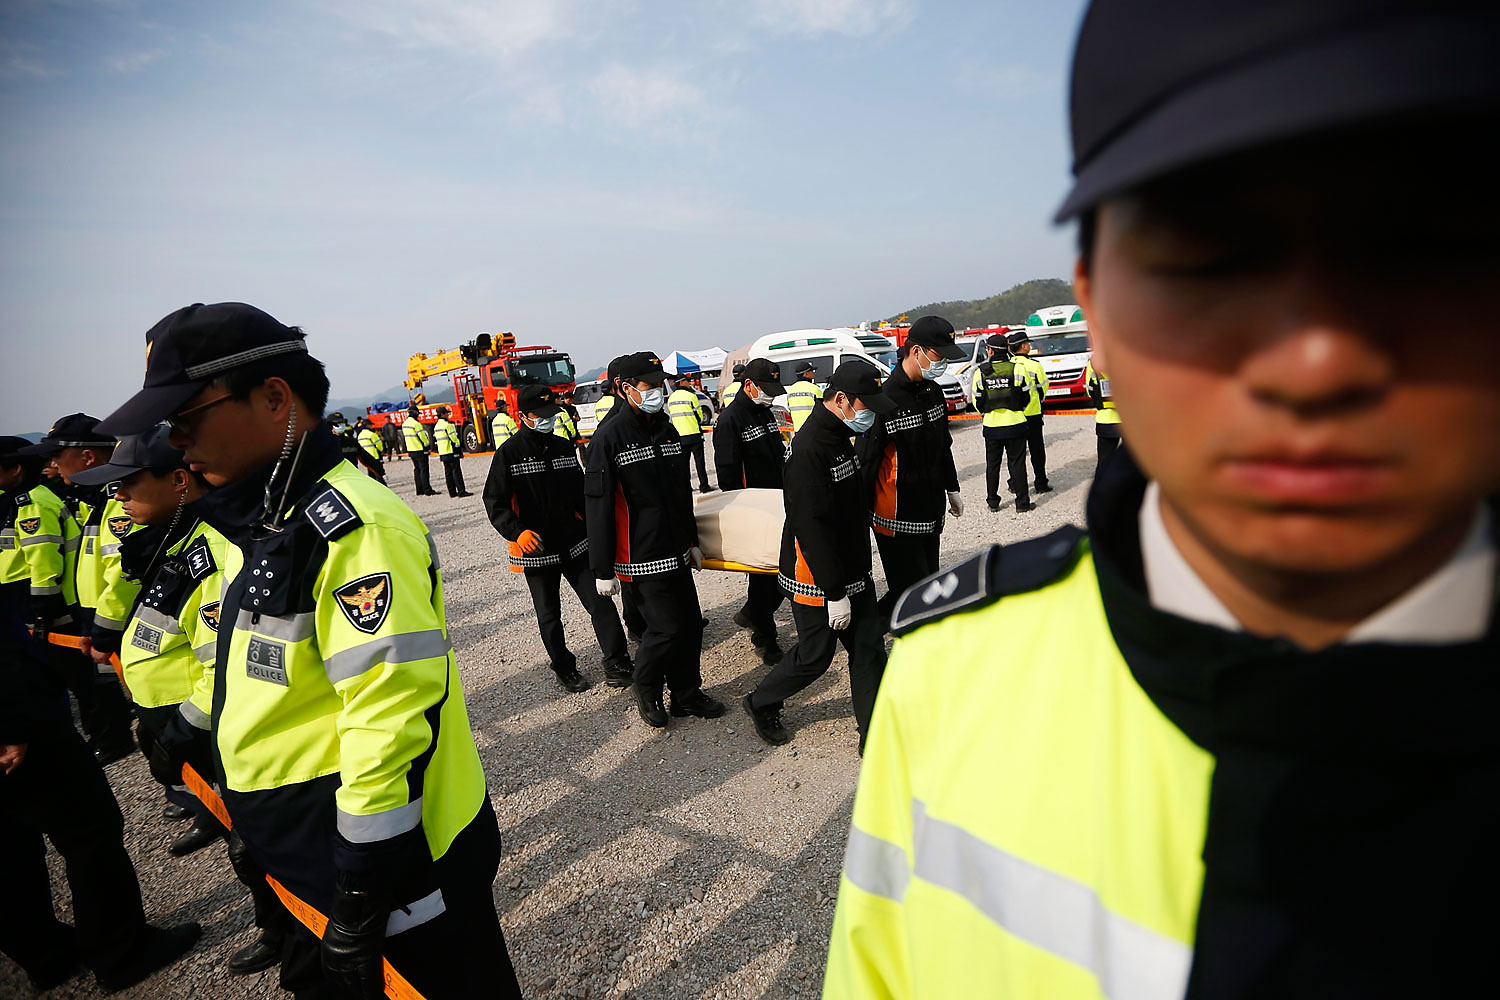 Rescue workers carry the body of a passenger who was on the capsized <i>Sewol</i> passenger ship in Jindo, the South Korean port town where family members of the missing passengers have gathered, on  April 20, 2014 (Kim Hong-Ji—Reuters)